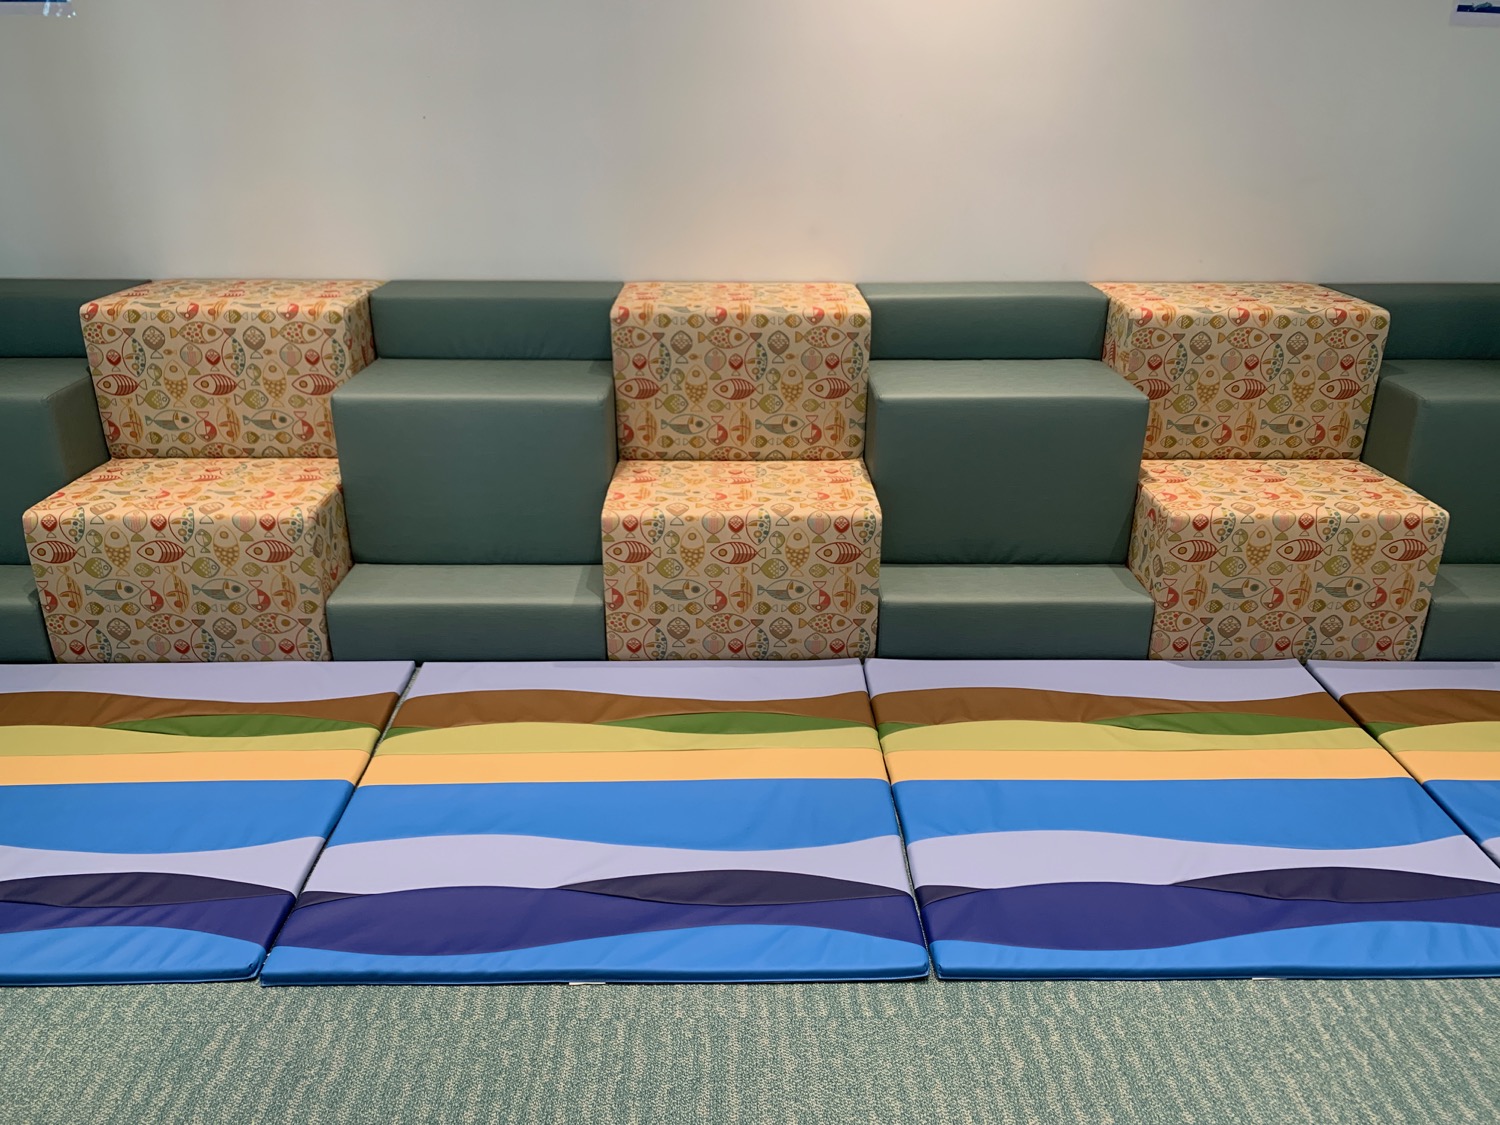 a group of colorful mats on a carpet